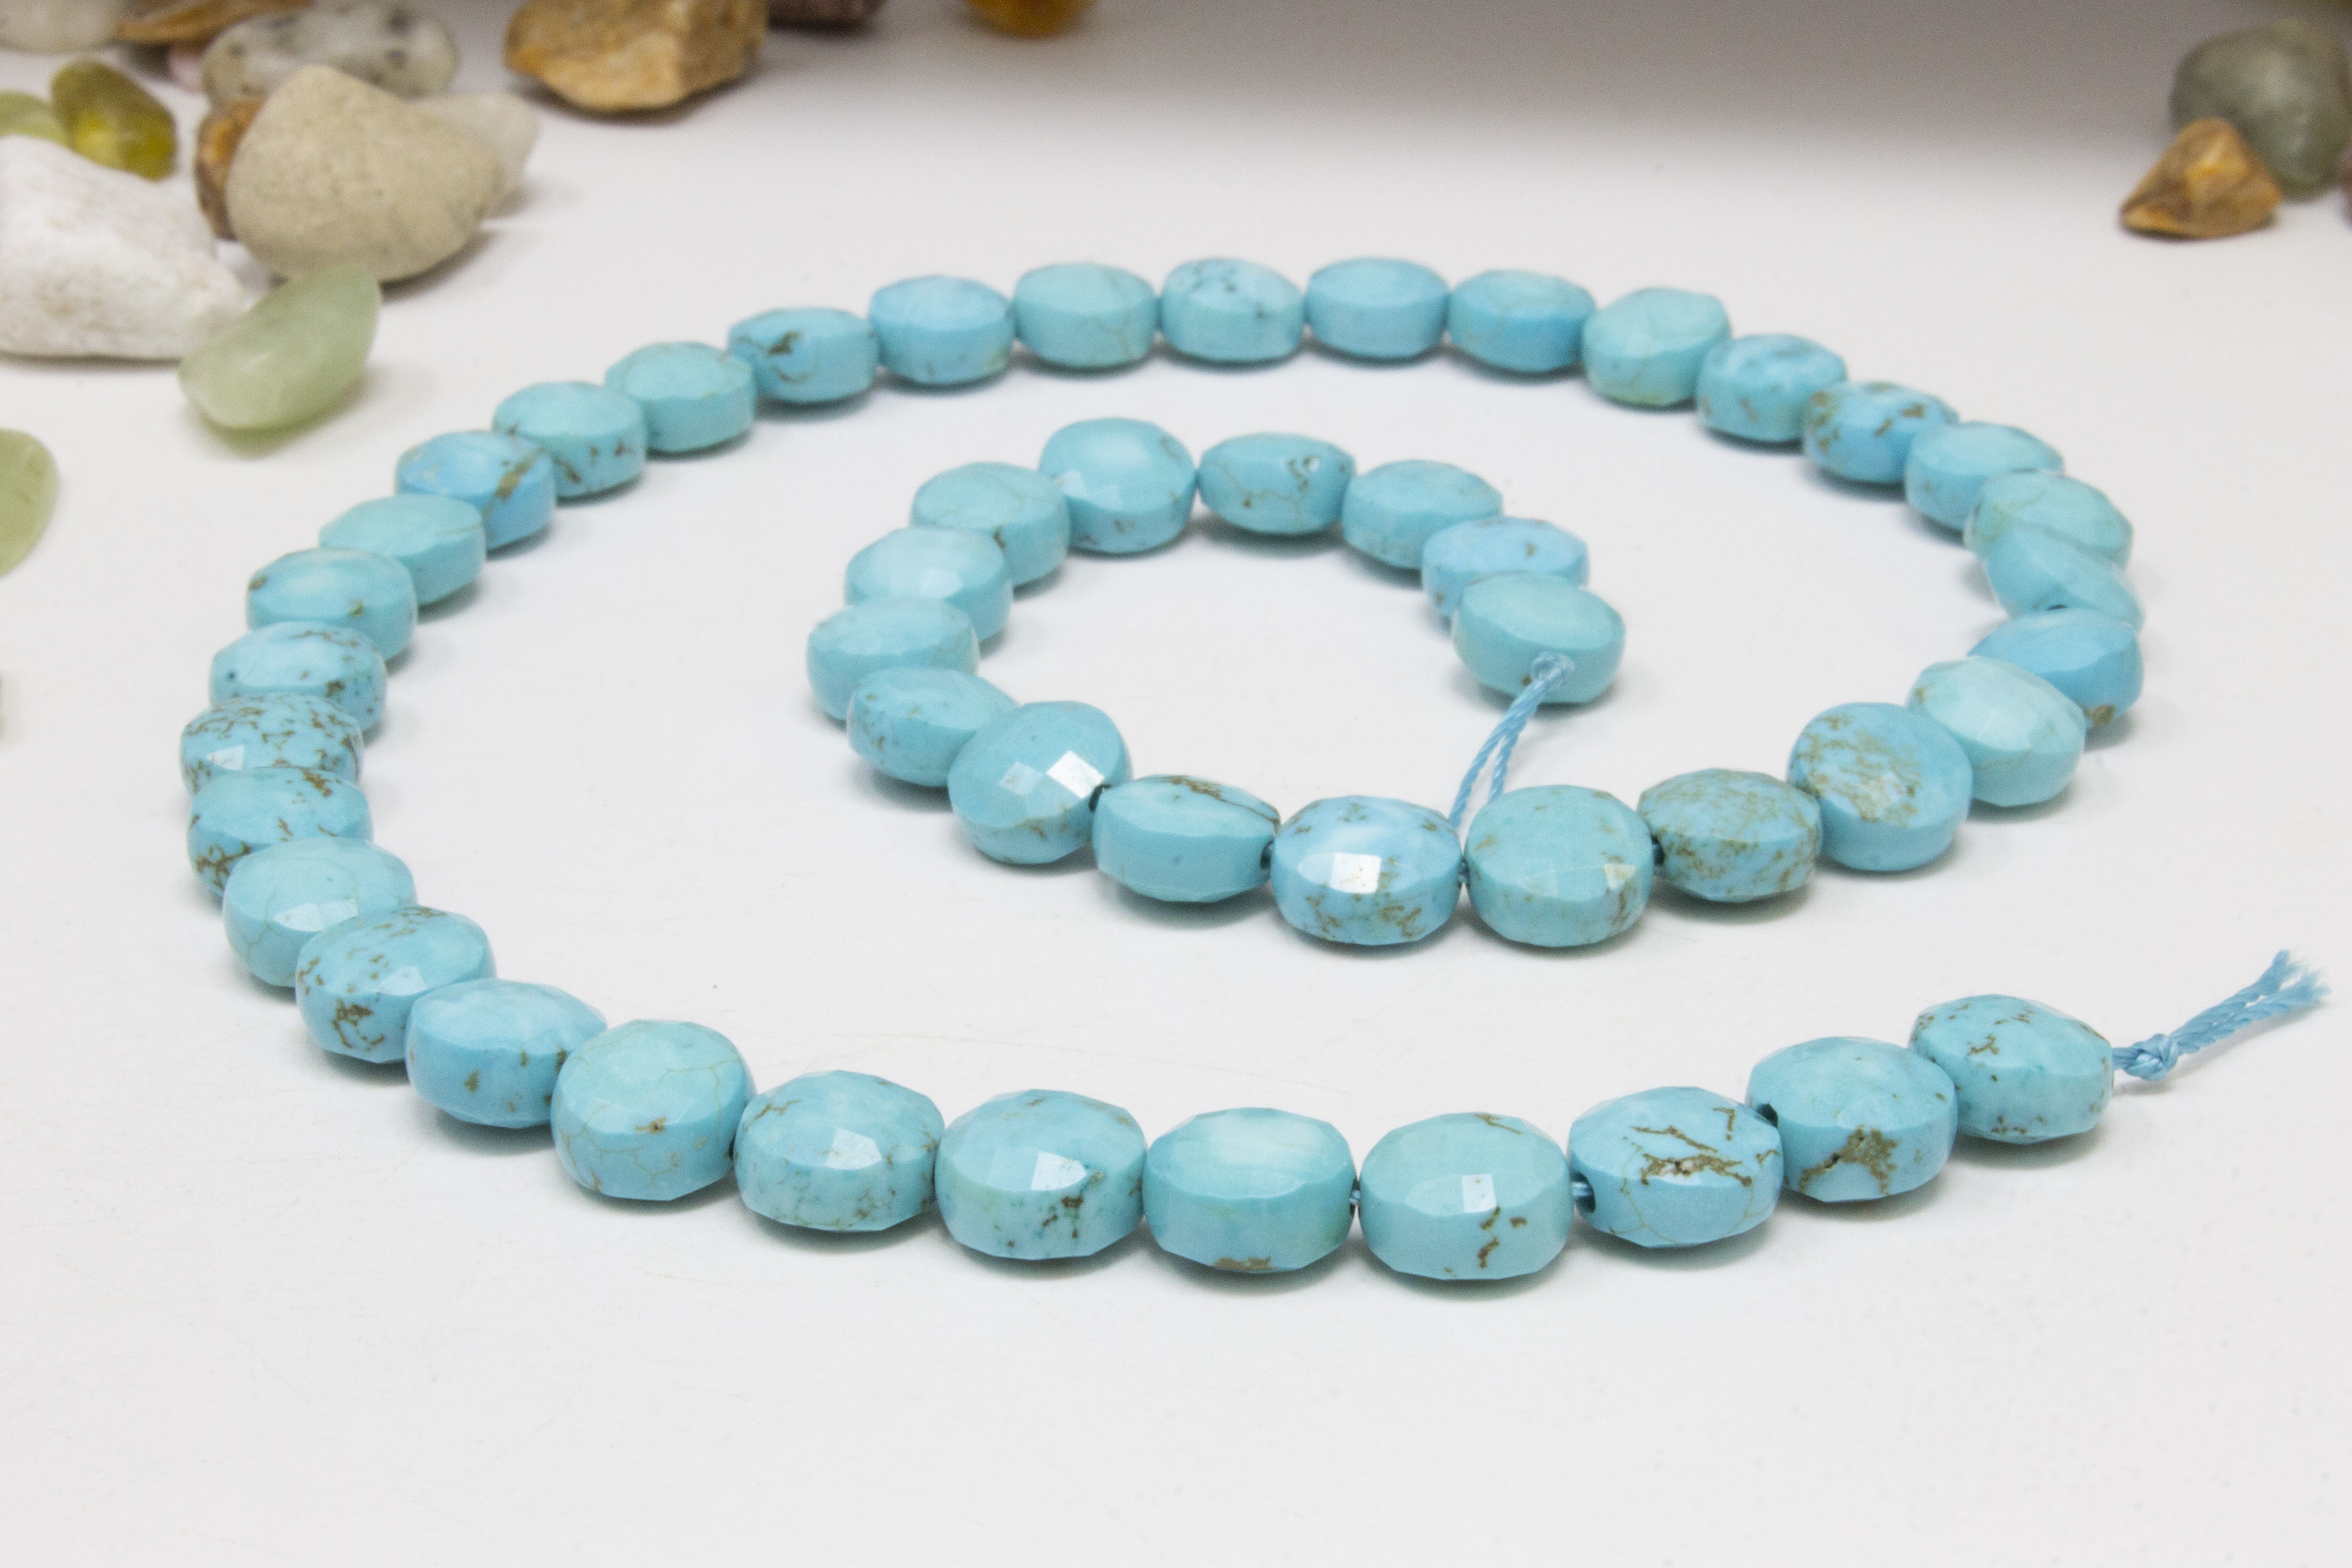 Turquoise Howlite 8x10mm Faceted Top Drilled Flat Teardrop Beads - 8 inch  strand